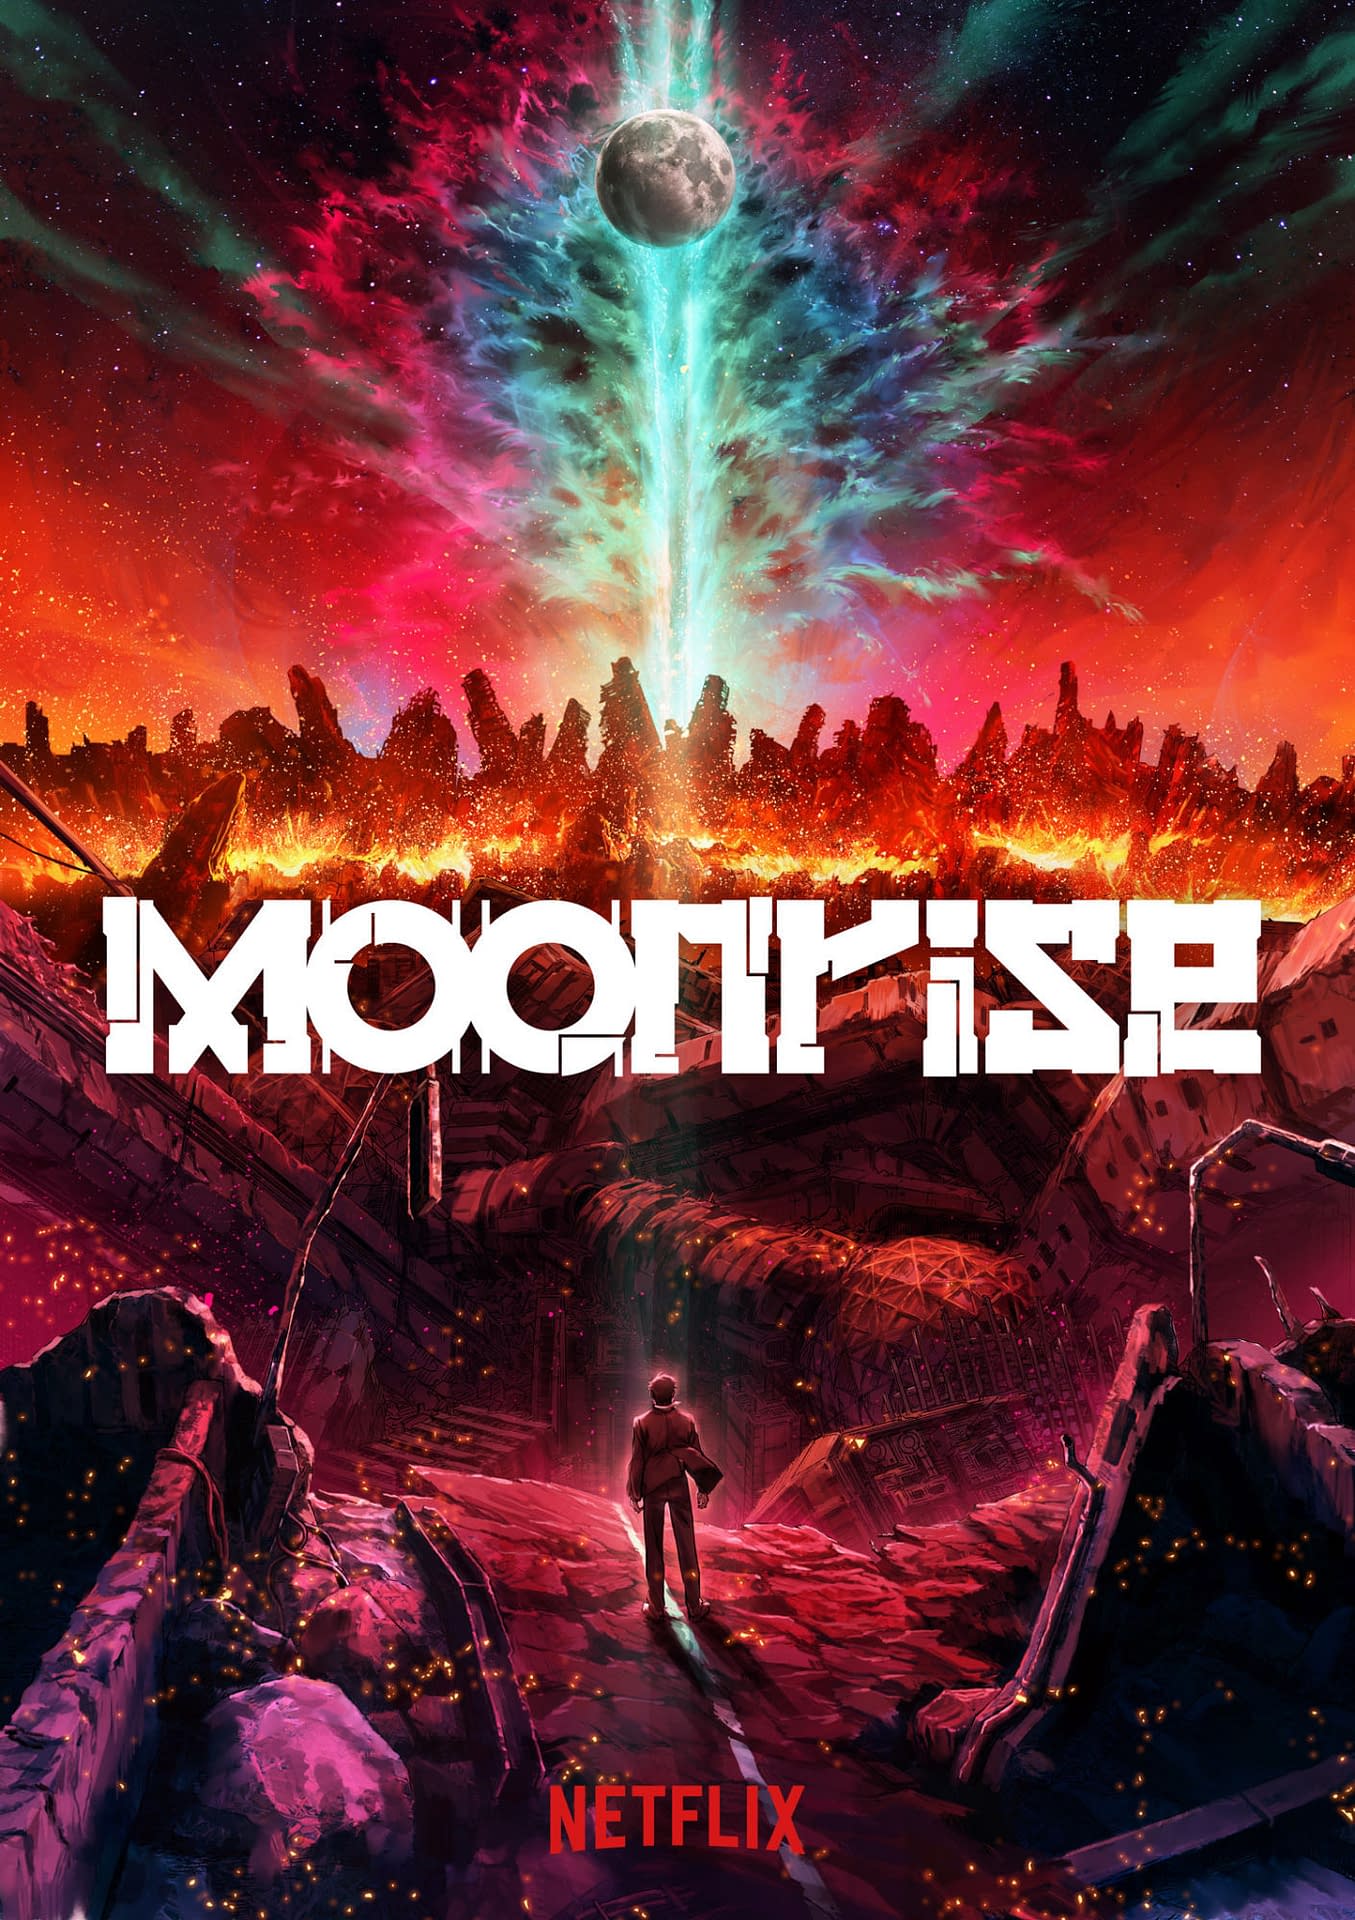 Moonrise: Netflix Shares Official Trailer for New Sci-Fi Anime